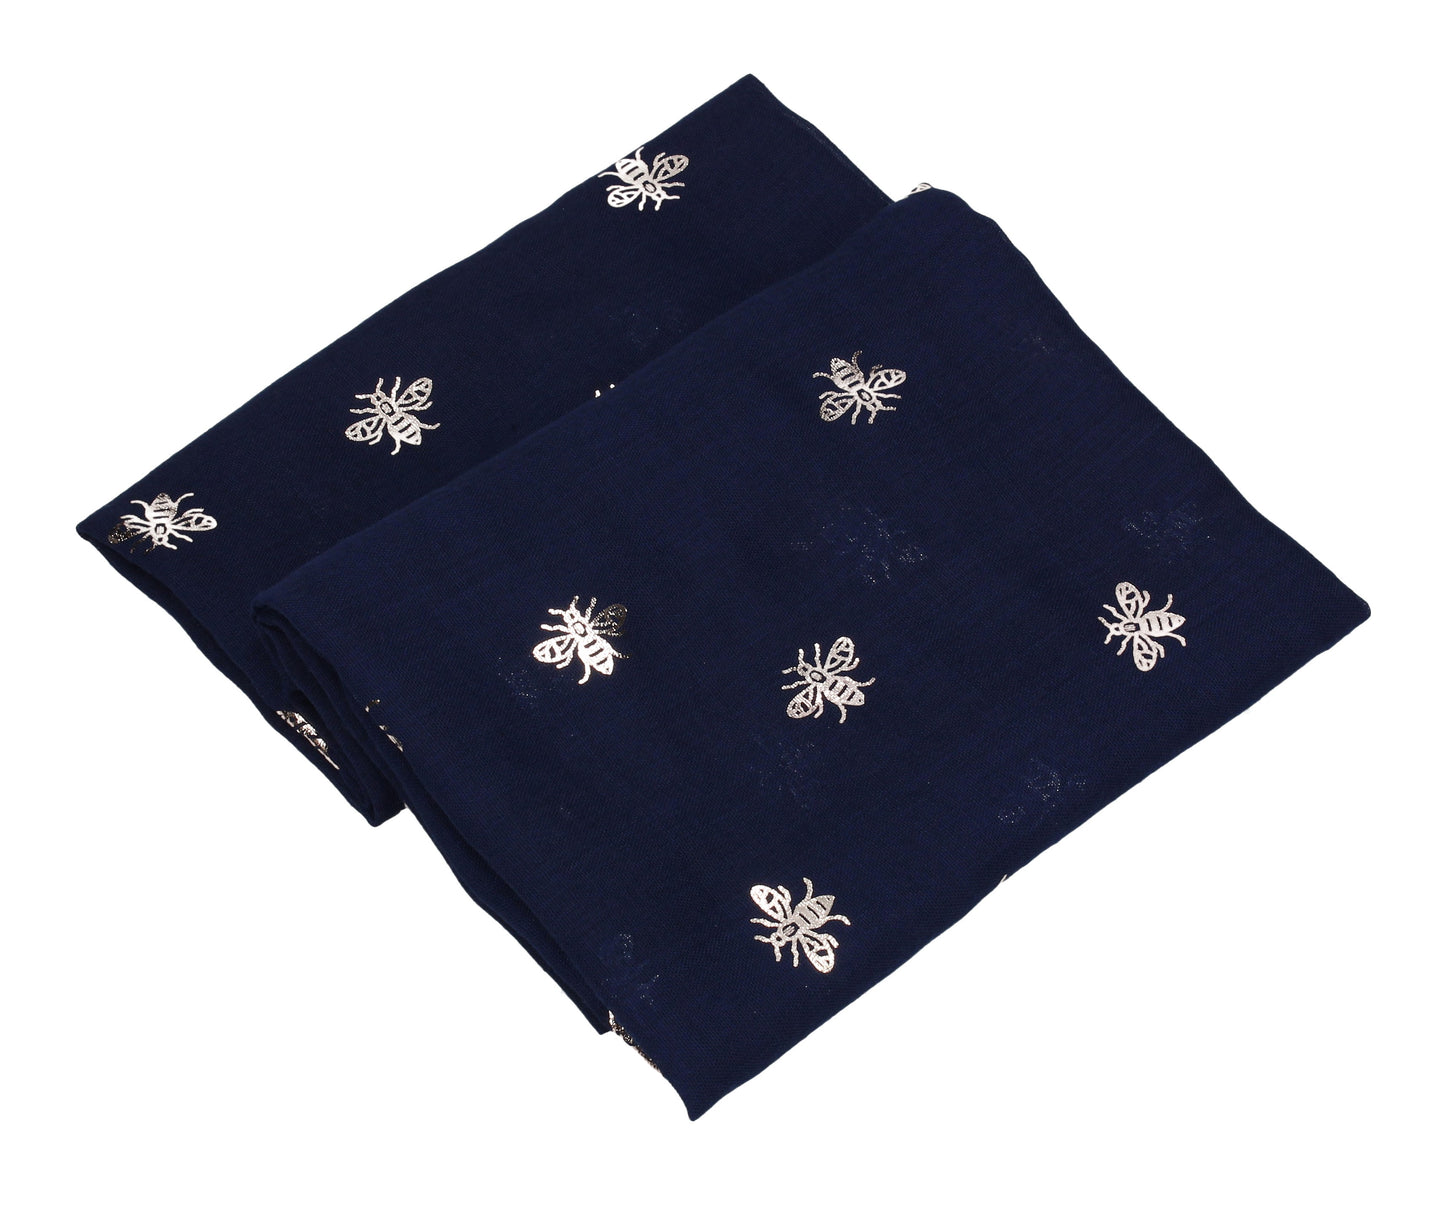 Worker Bee Gold  Foil Animal Print Winter Scarf Navy Blue